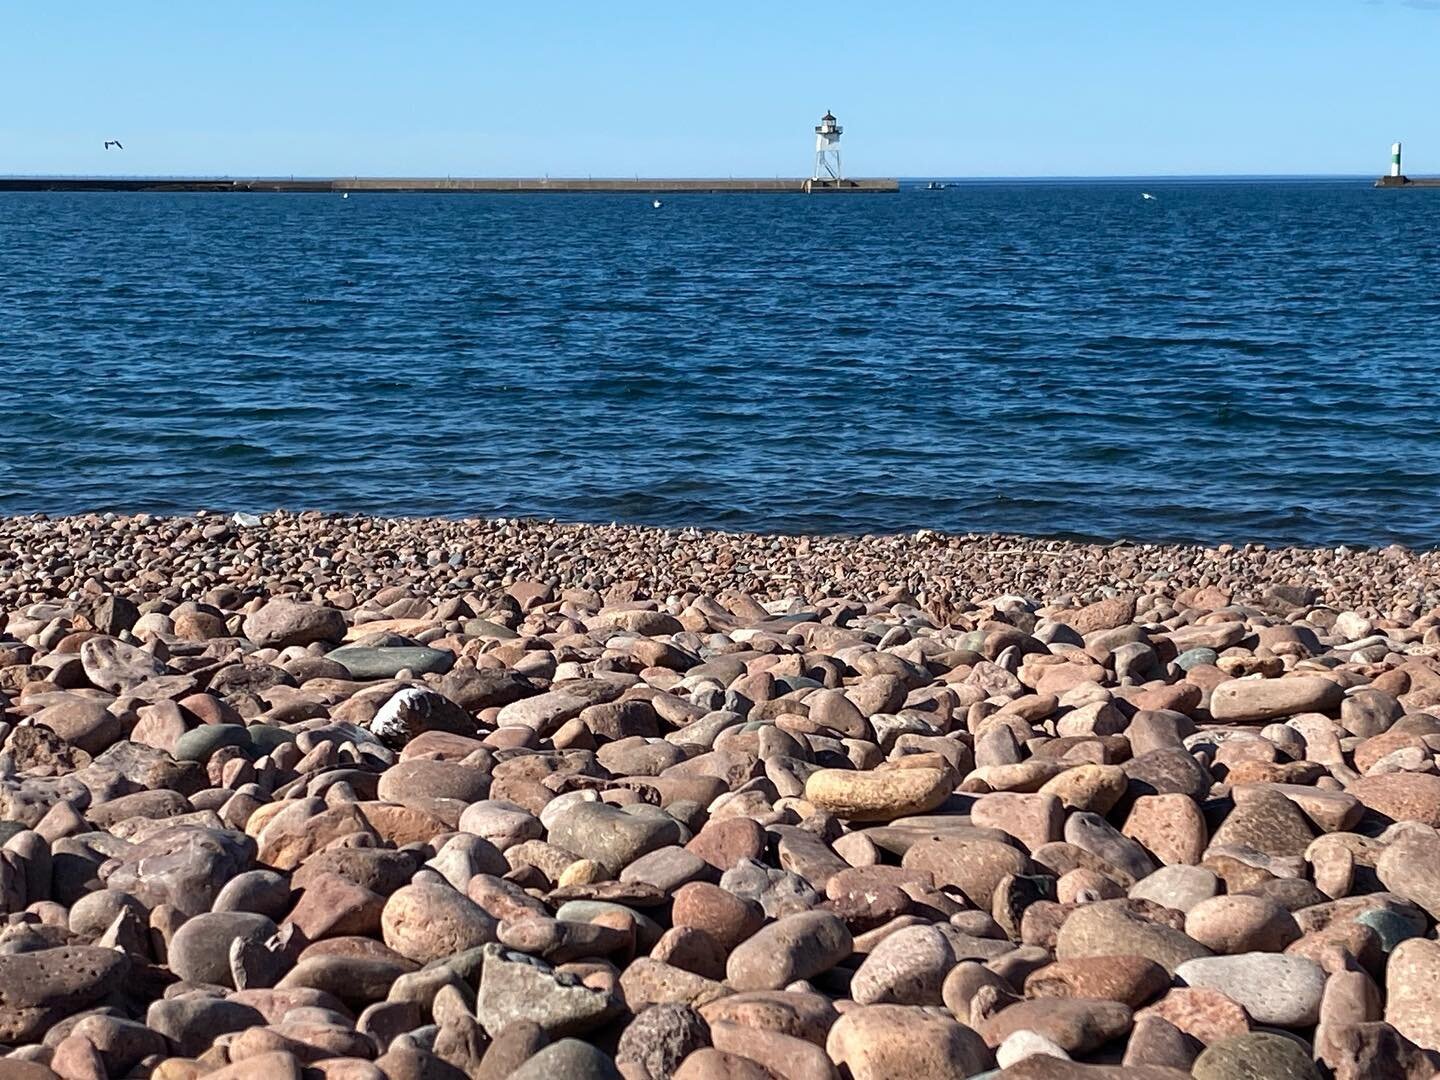 Harbor watch: one or two stones don&rsquo;t make a beach but each one is necessary. One or two people don&rsquo;t make a movement but when enough are gathered, something powerful and beautiful can happen.